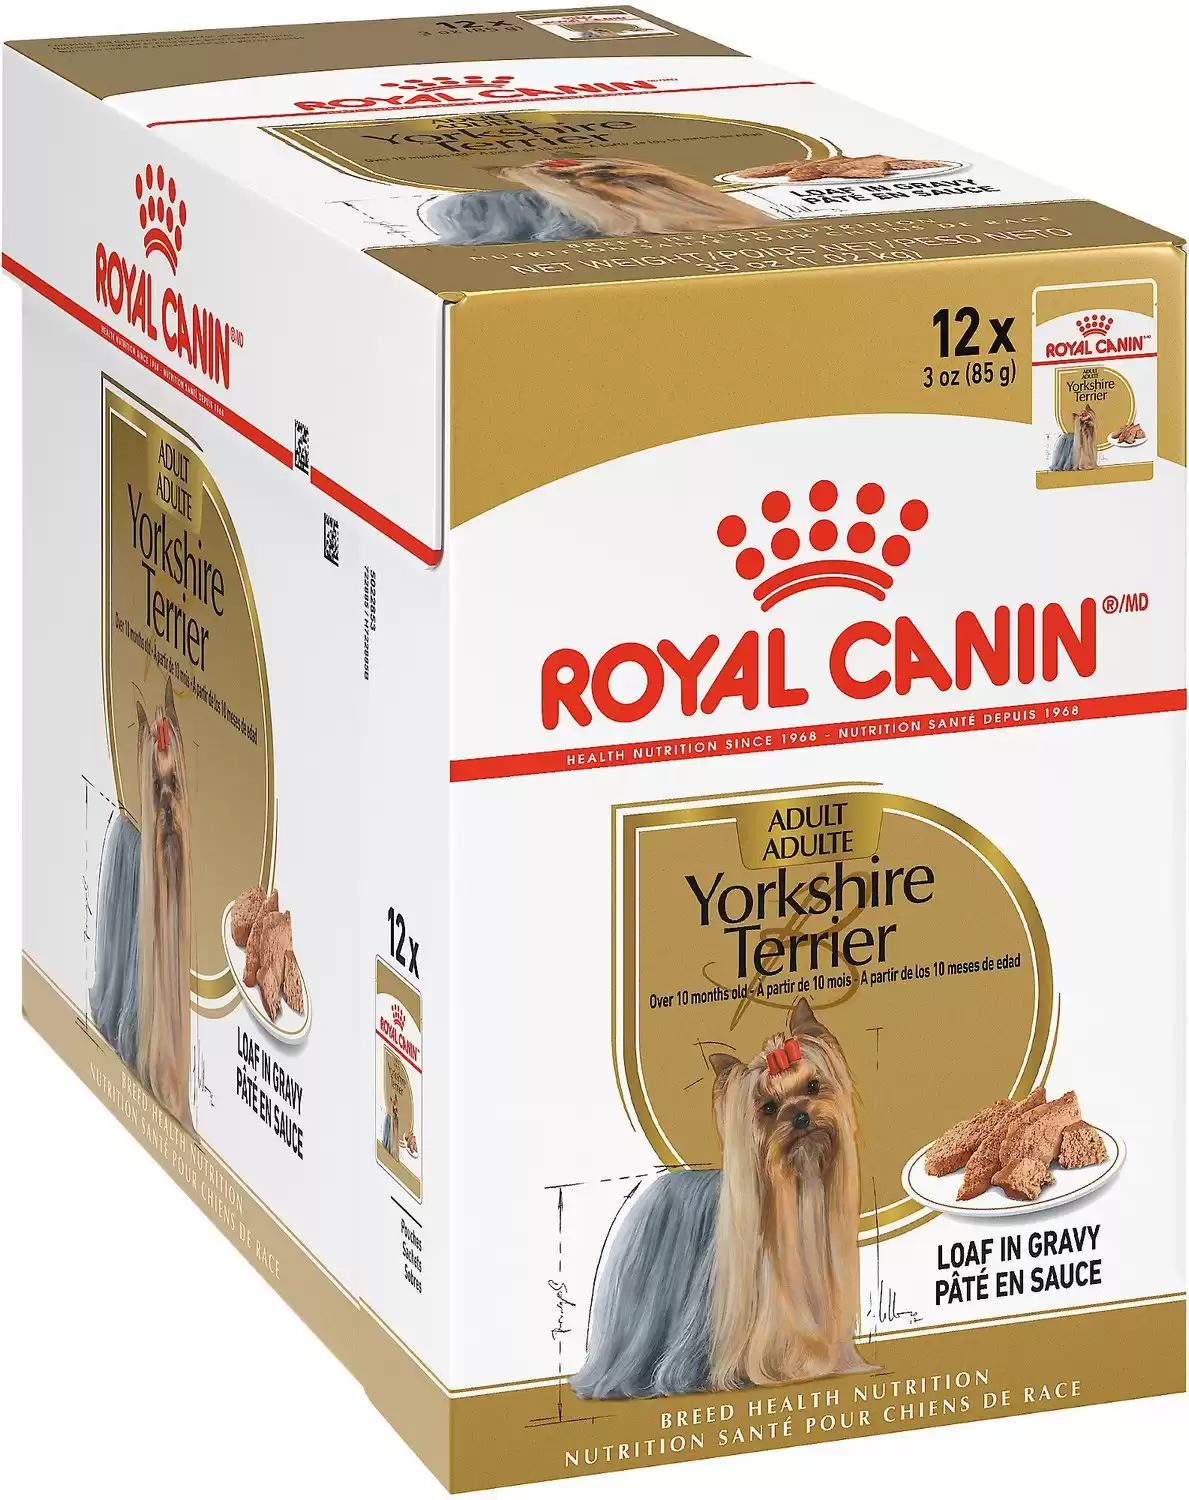 Royal Canin Breed Health Nutrition Yorkshire Terrier Adult Loaf in Gravy Pouch Dog Food, 3-oz pouch, case of 12